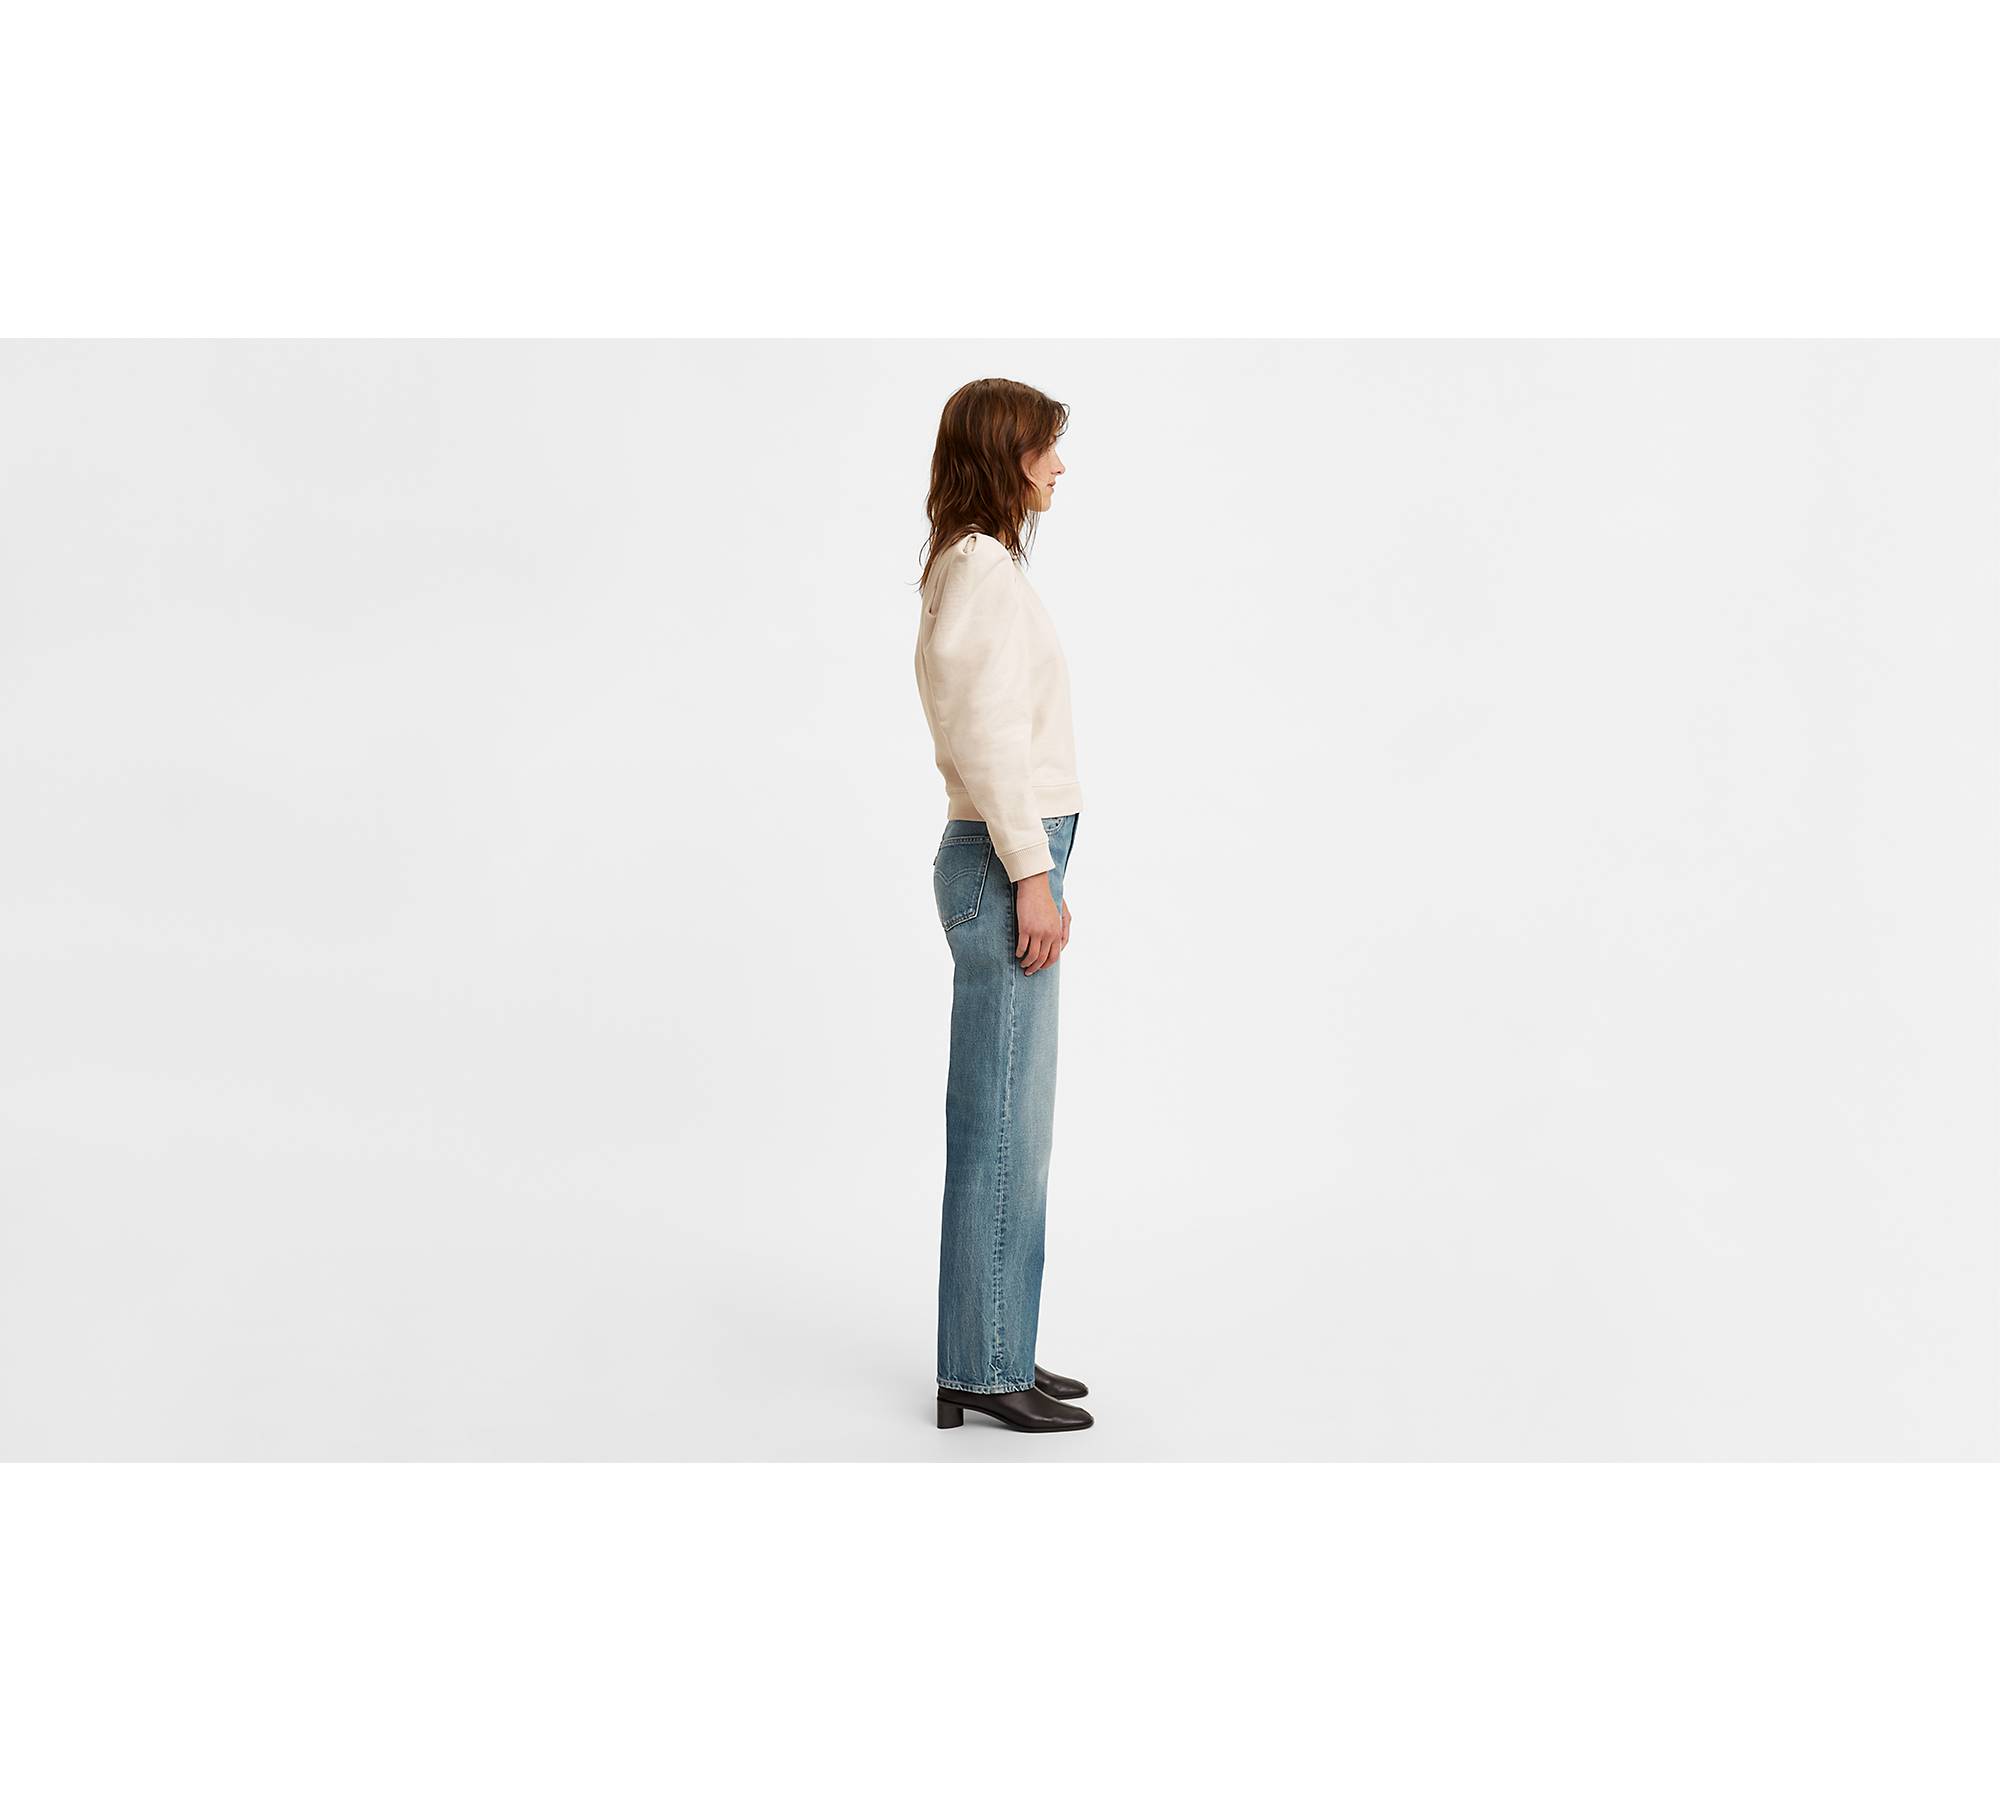 Uniqlo x JW Anderson's budget-friendly bootcut jeans are now on